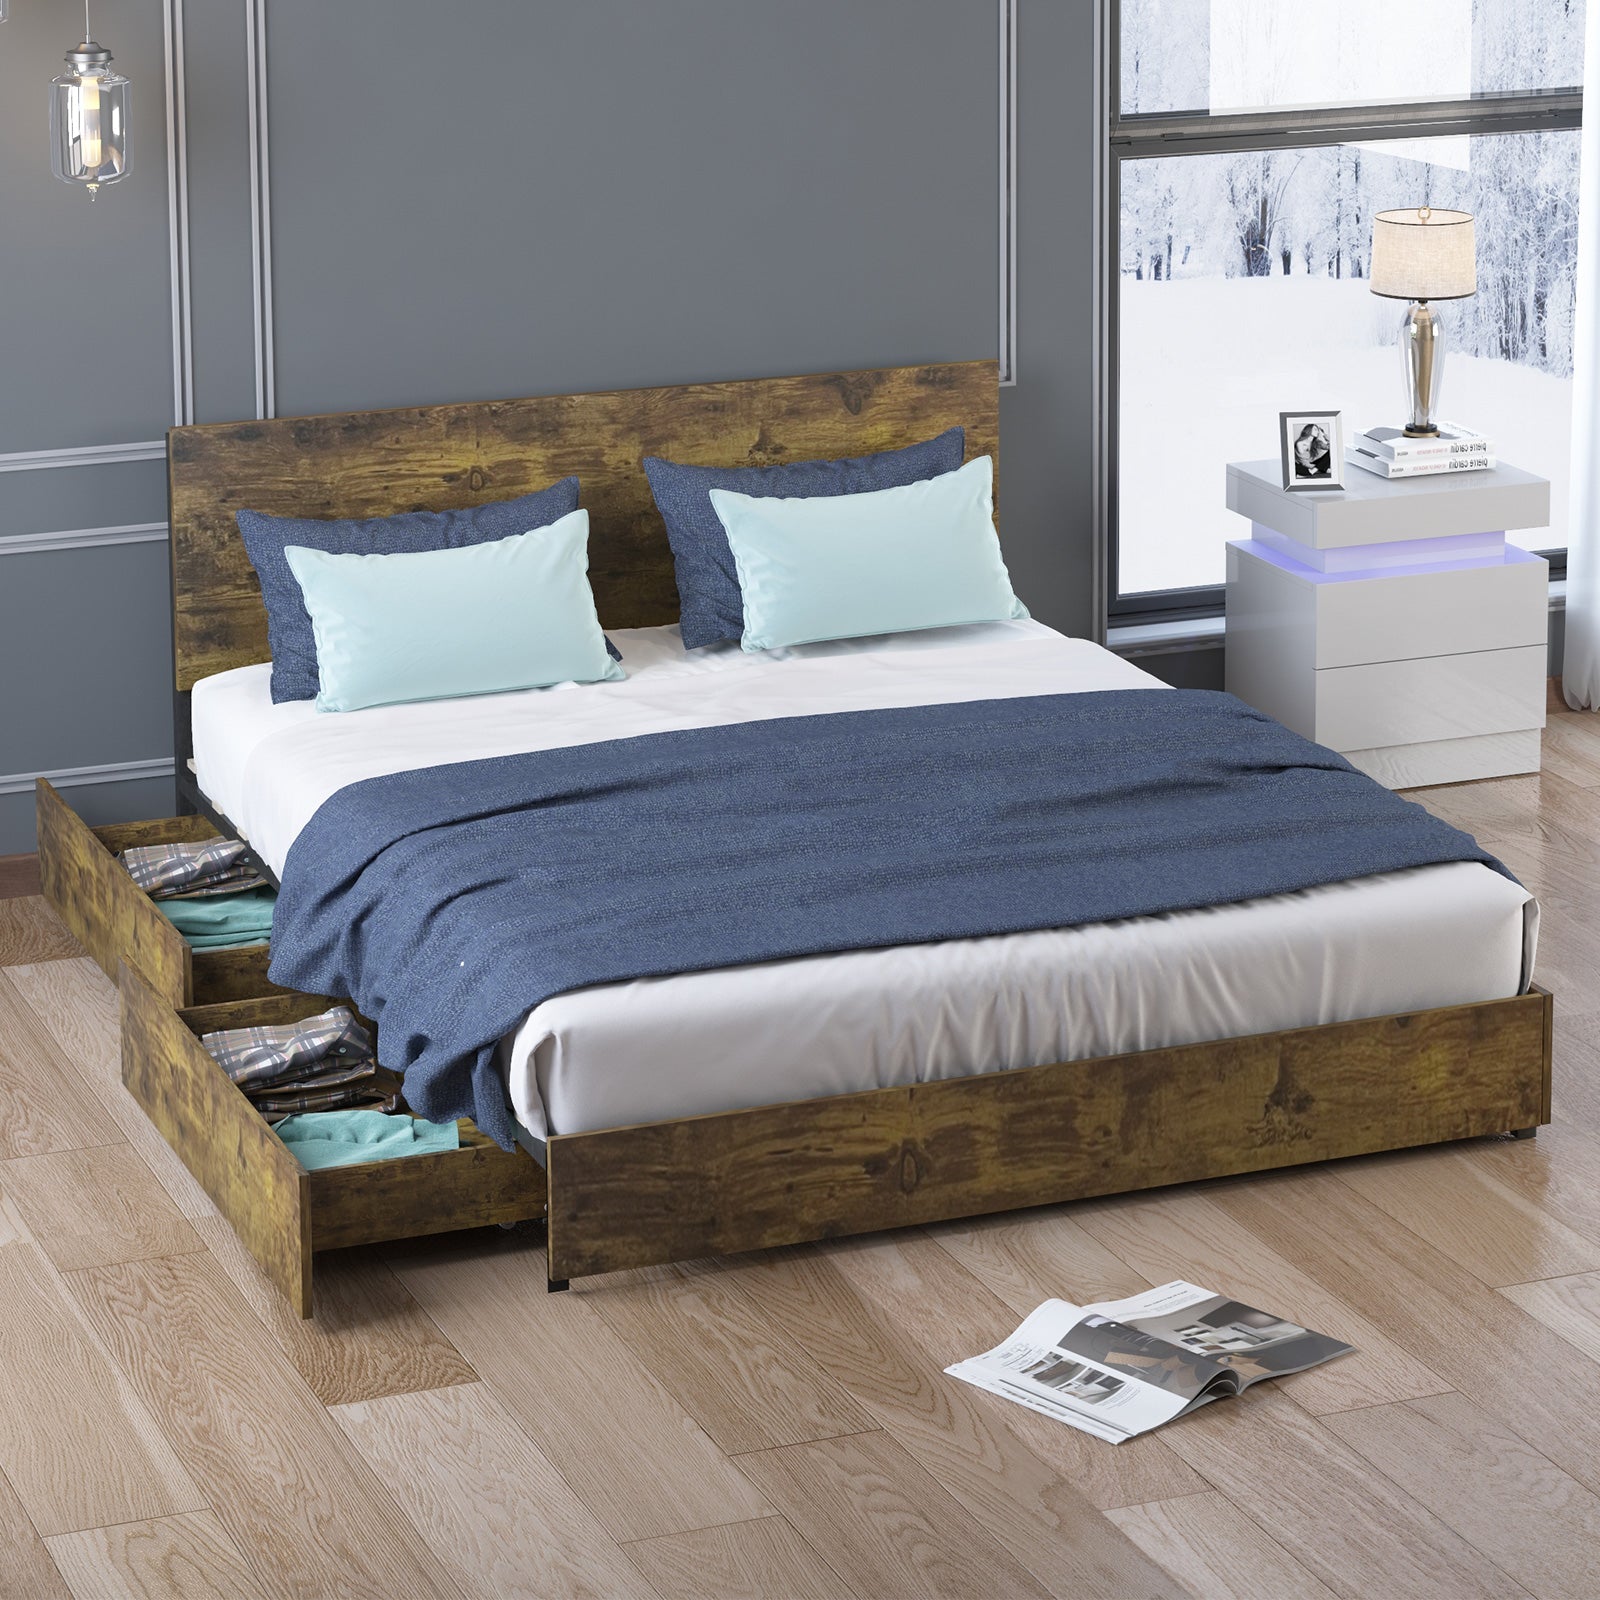 Drawer Bed | Wood Slat Bed Frame With 4 Wooden Storage Drawers - uenjoybed